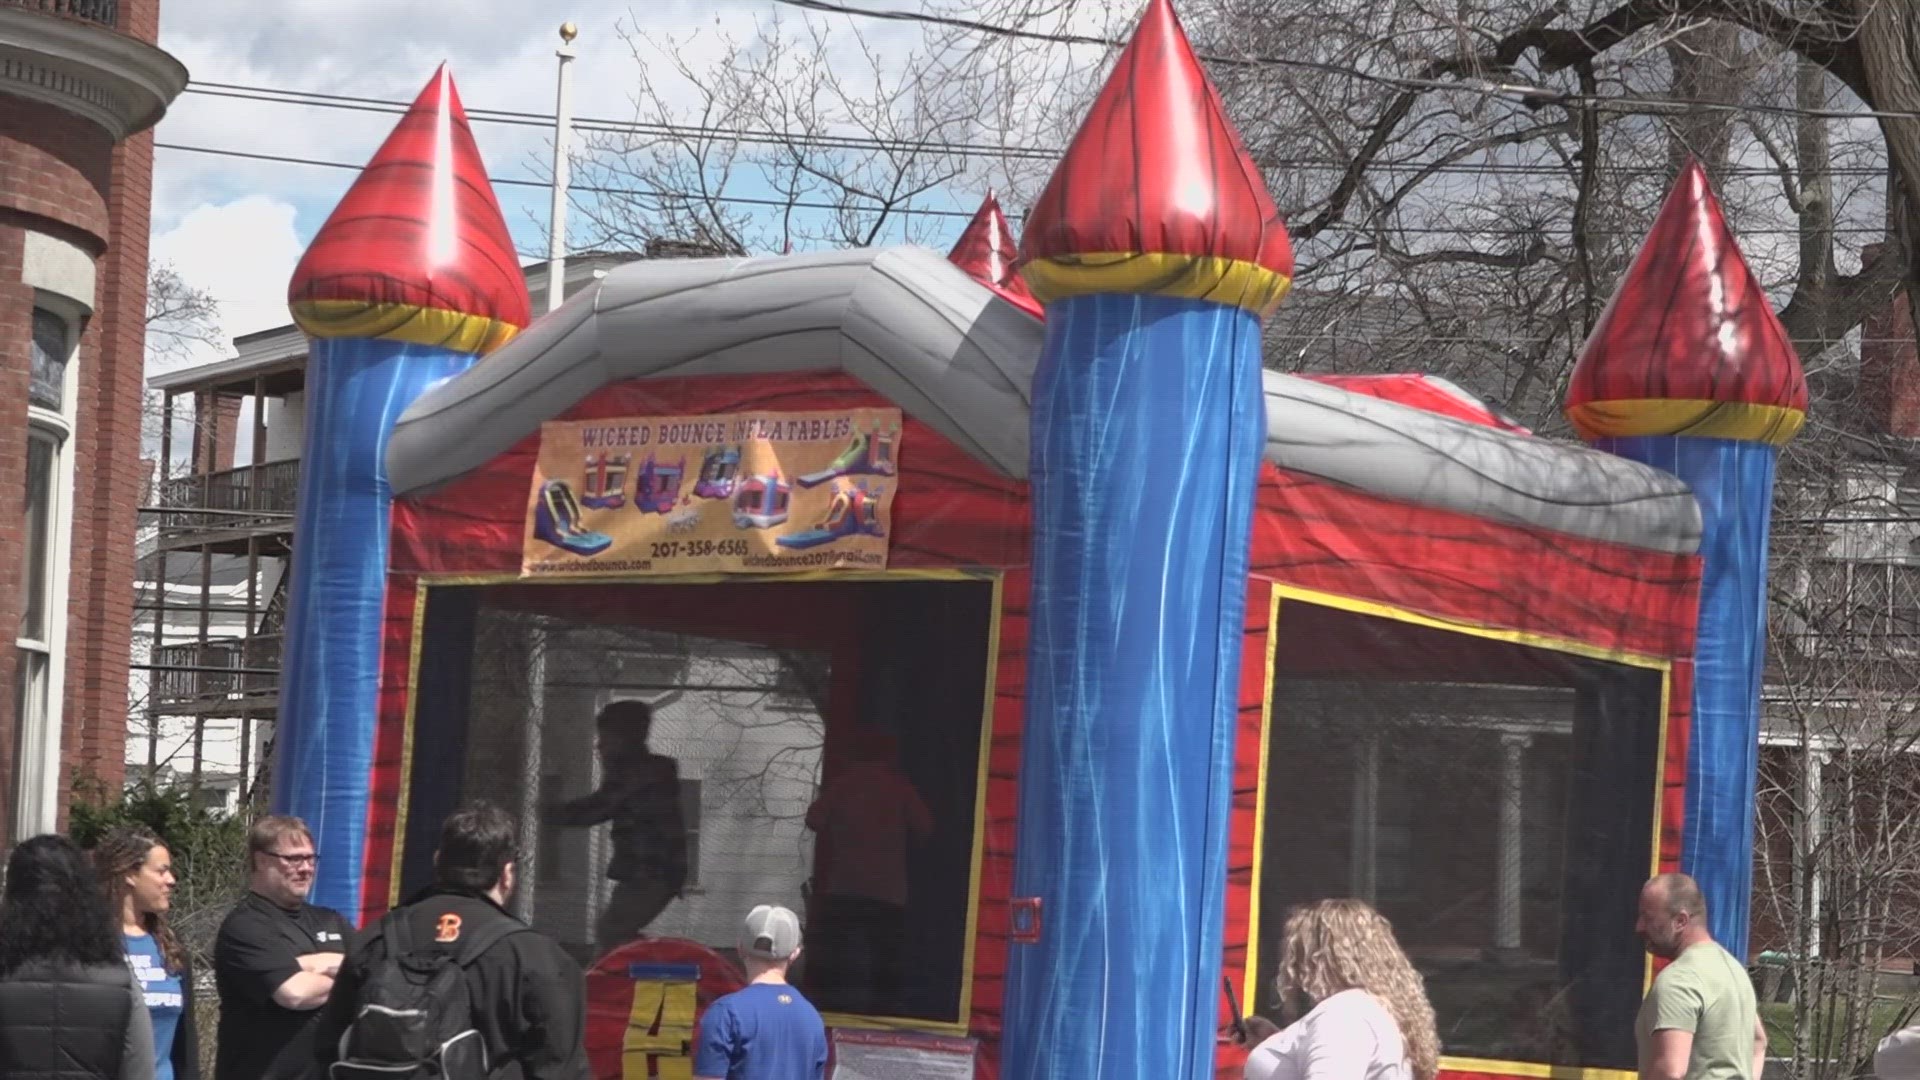 The event aims to connect parents with essential resources going into the summer, all while kids jump around a bouncy castle nearby.